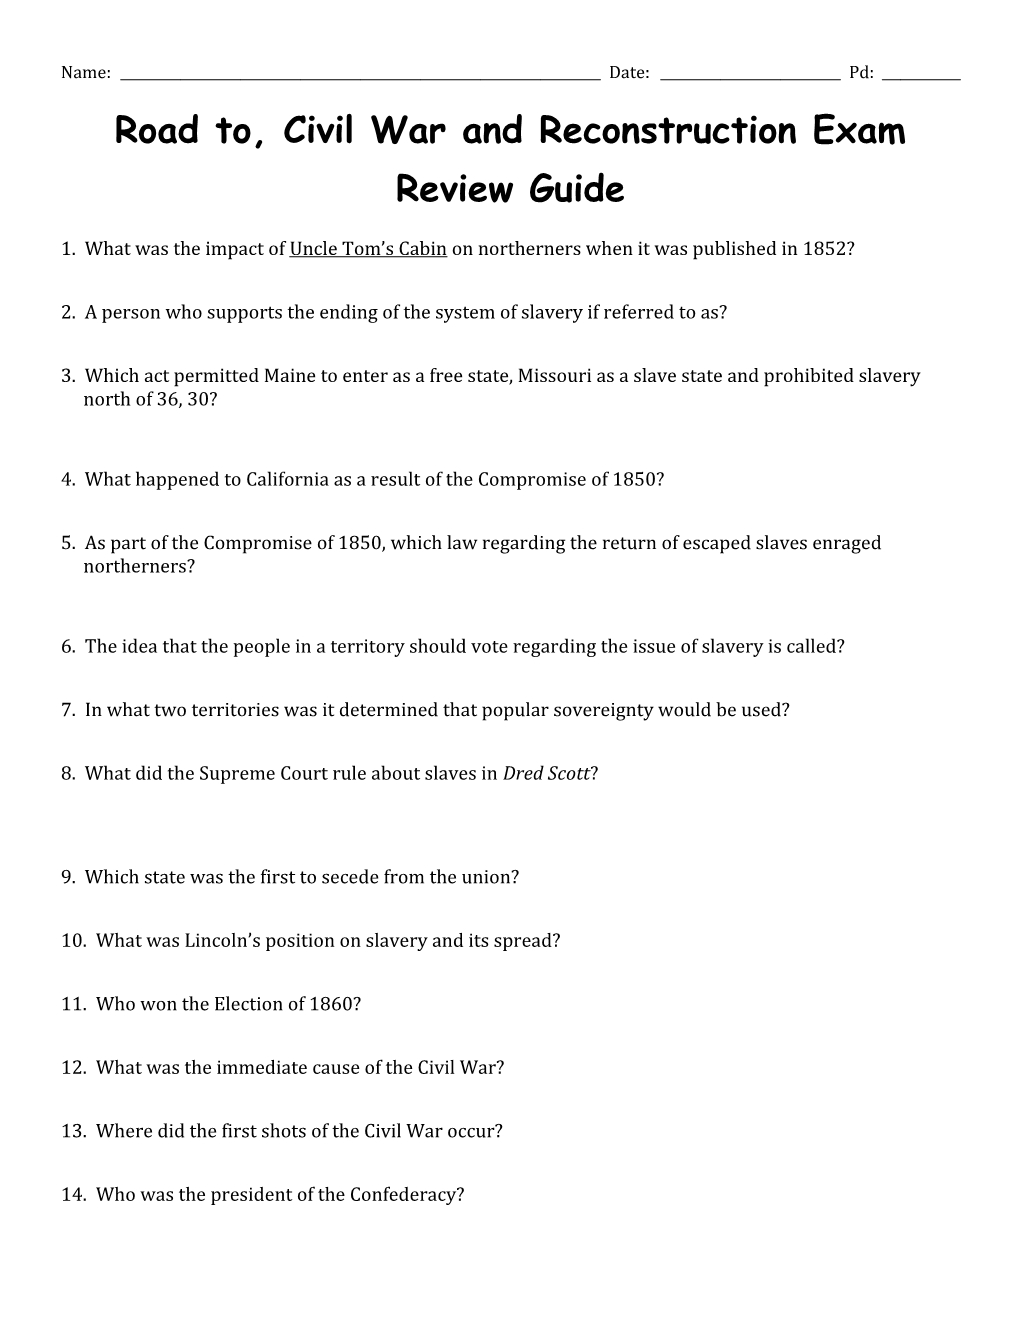 Road To, Civil War and Reconstruction Exam Review Guide